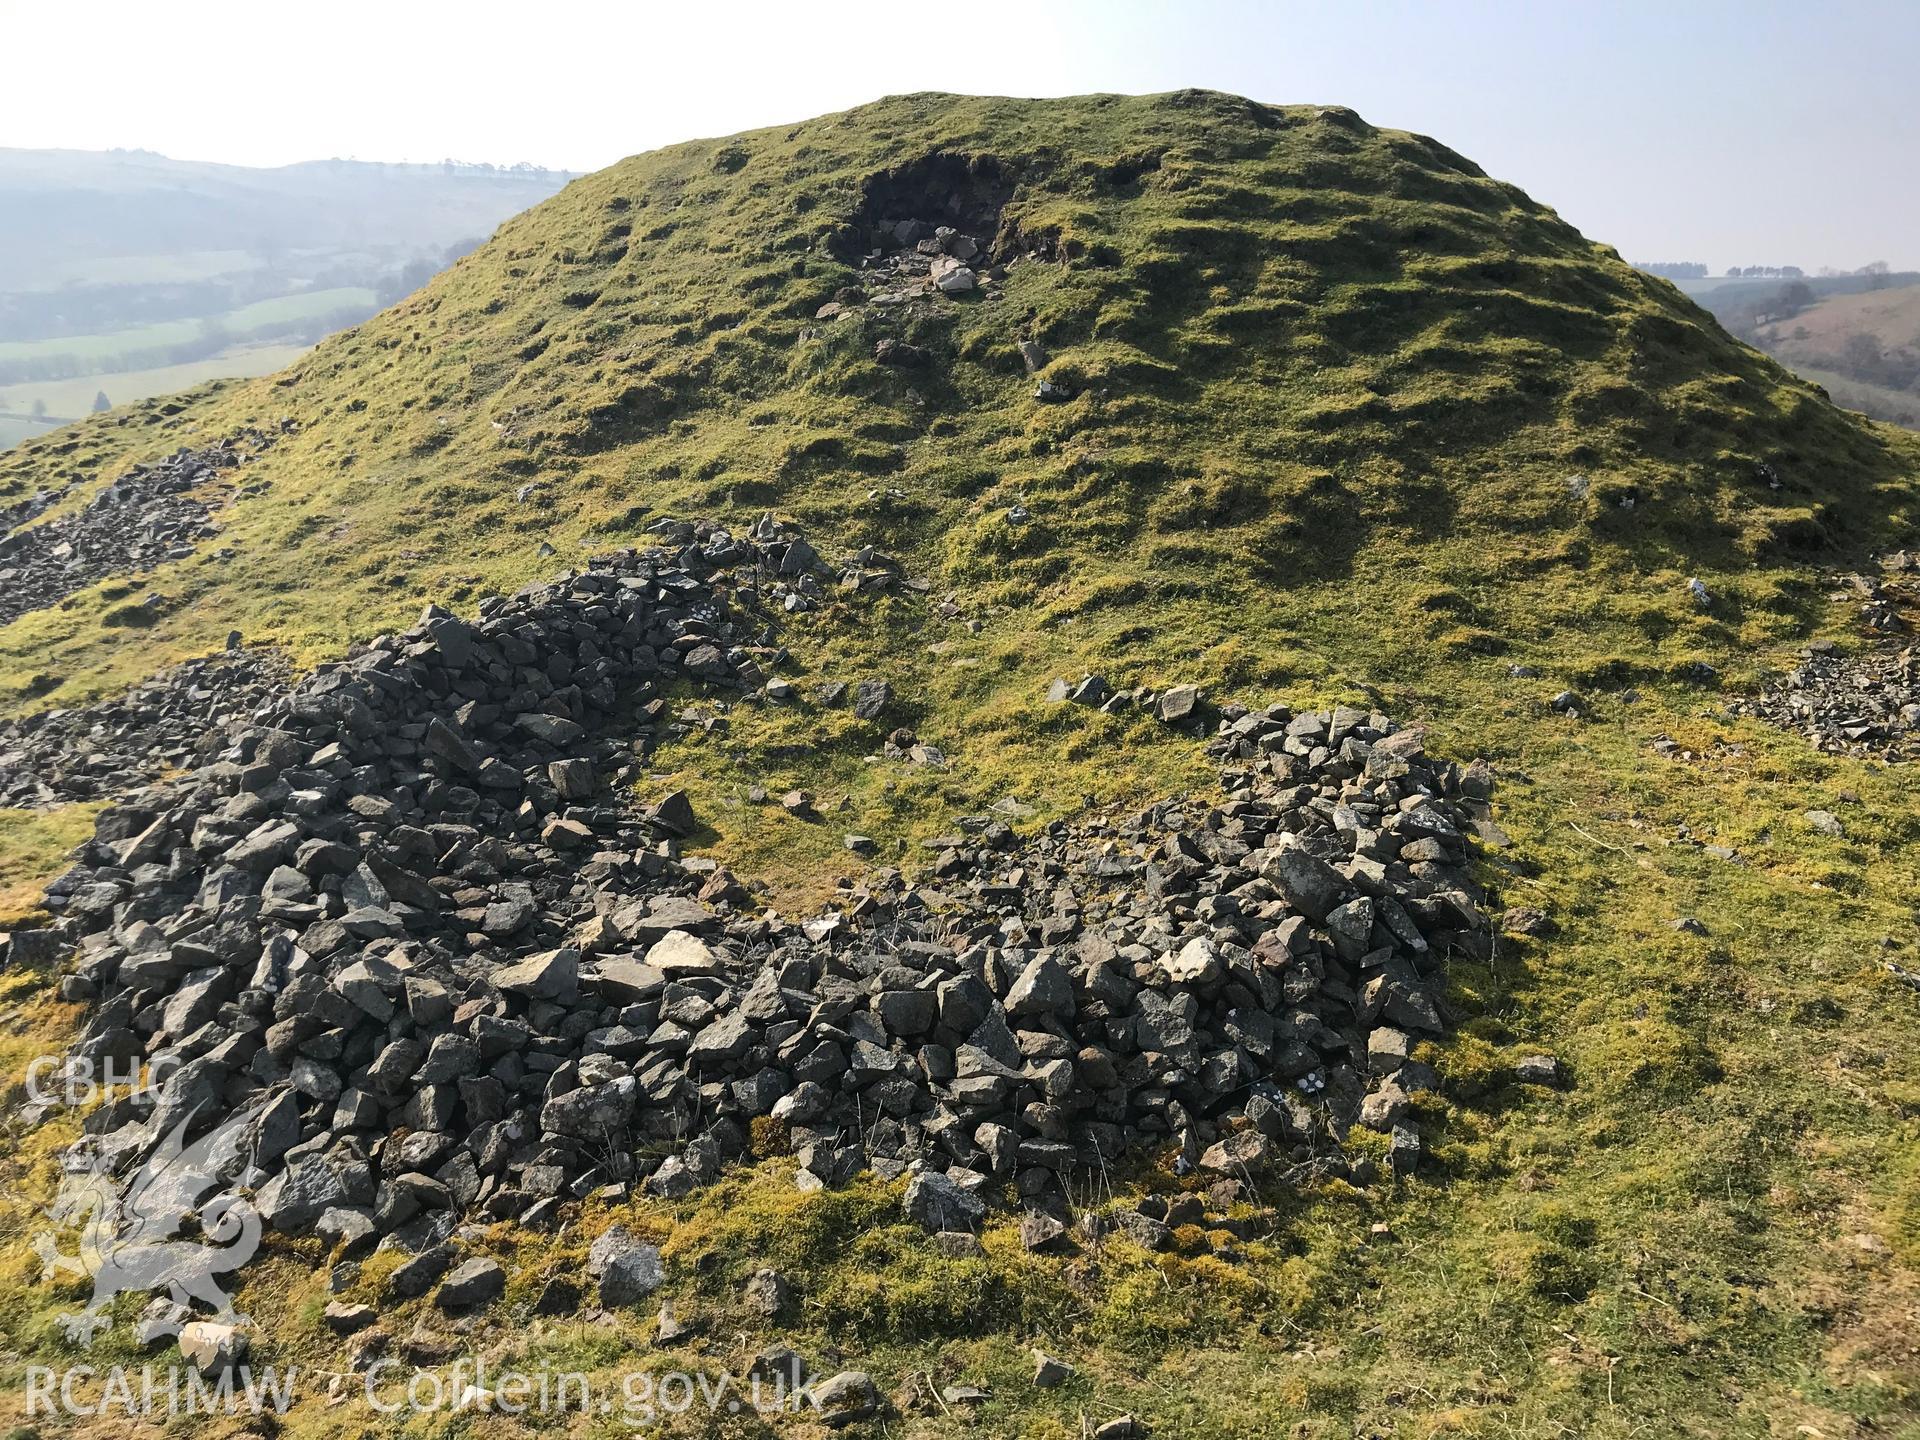 Colour photograph of Cefnllys Castle, east of Llandrindod Wells, taken by Paul R. Davis on 30th March 2019.